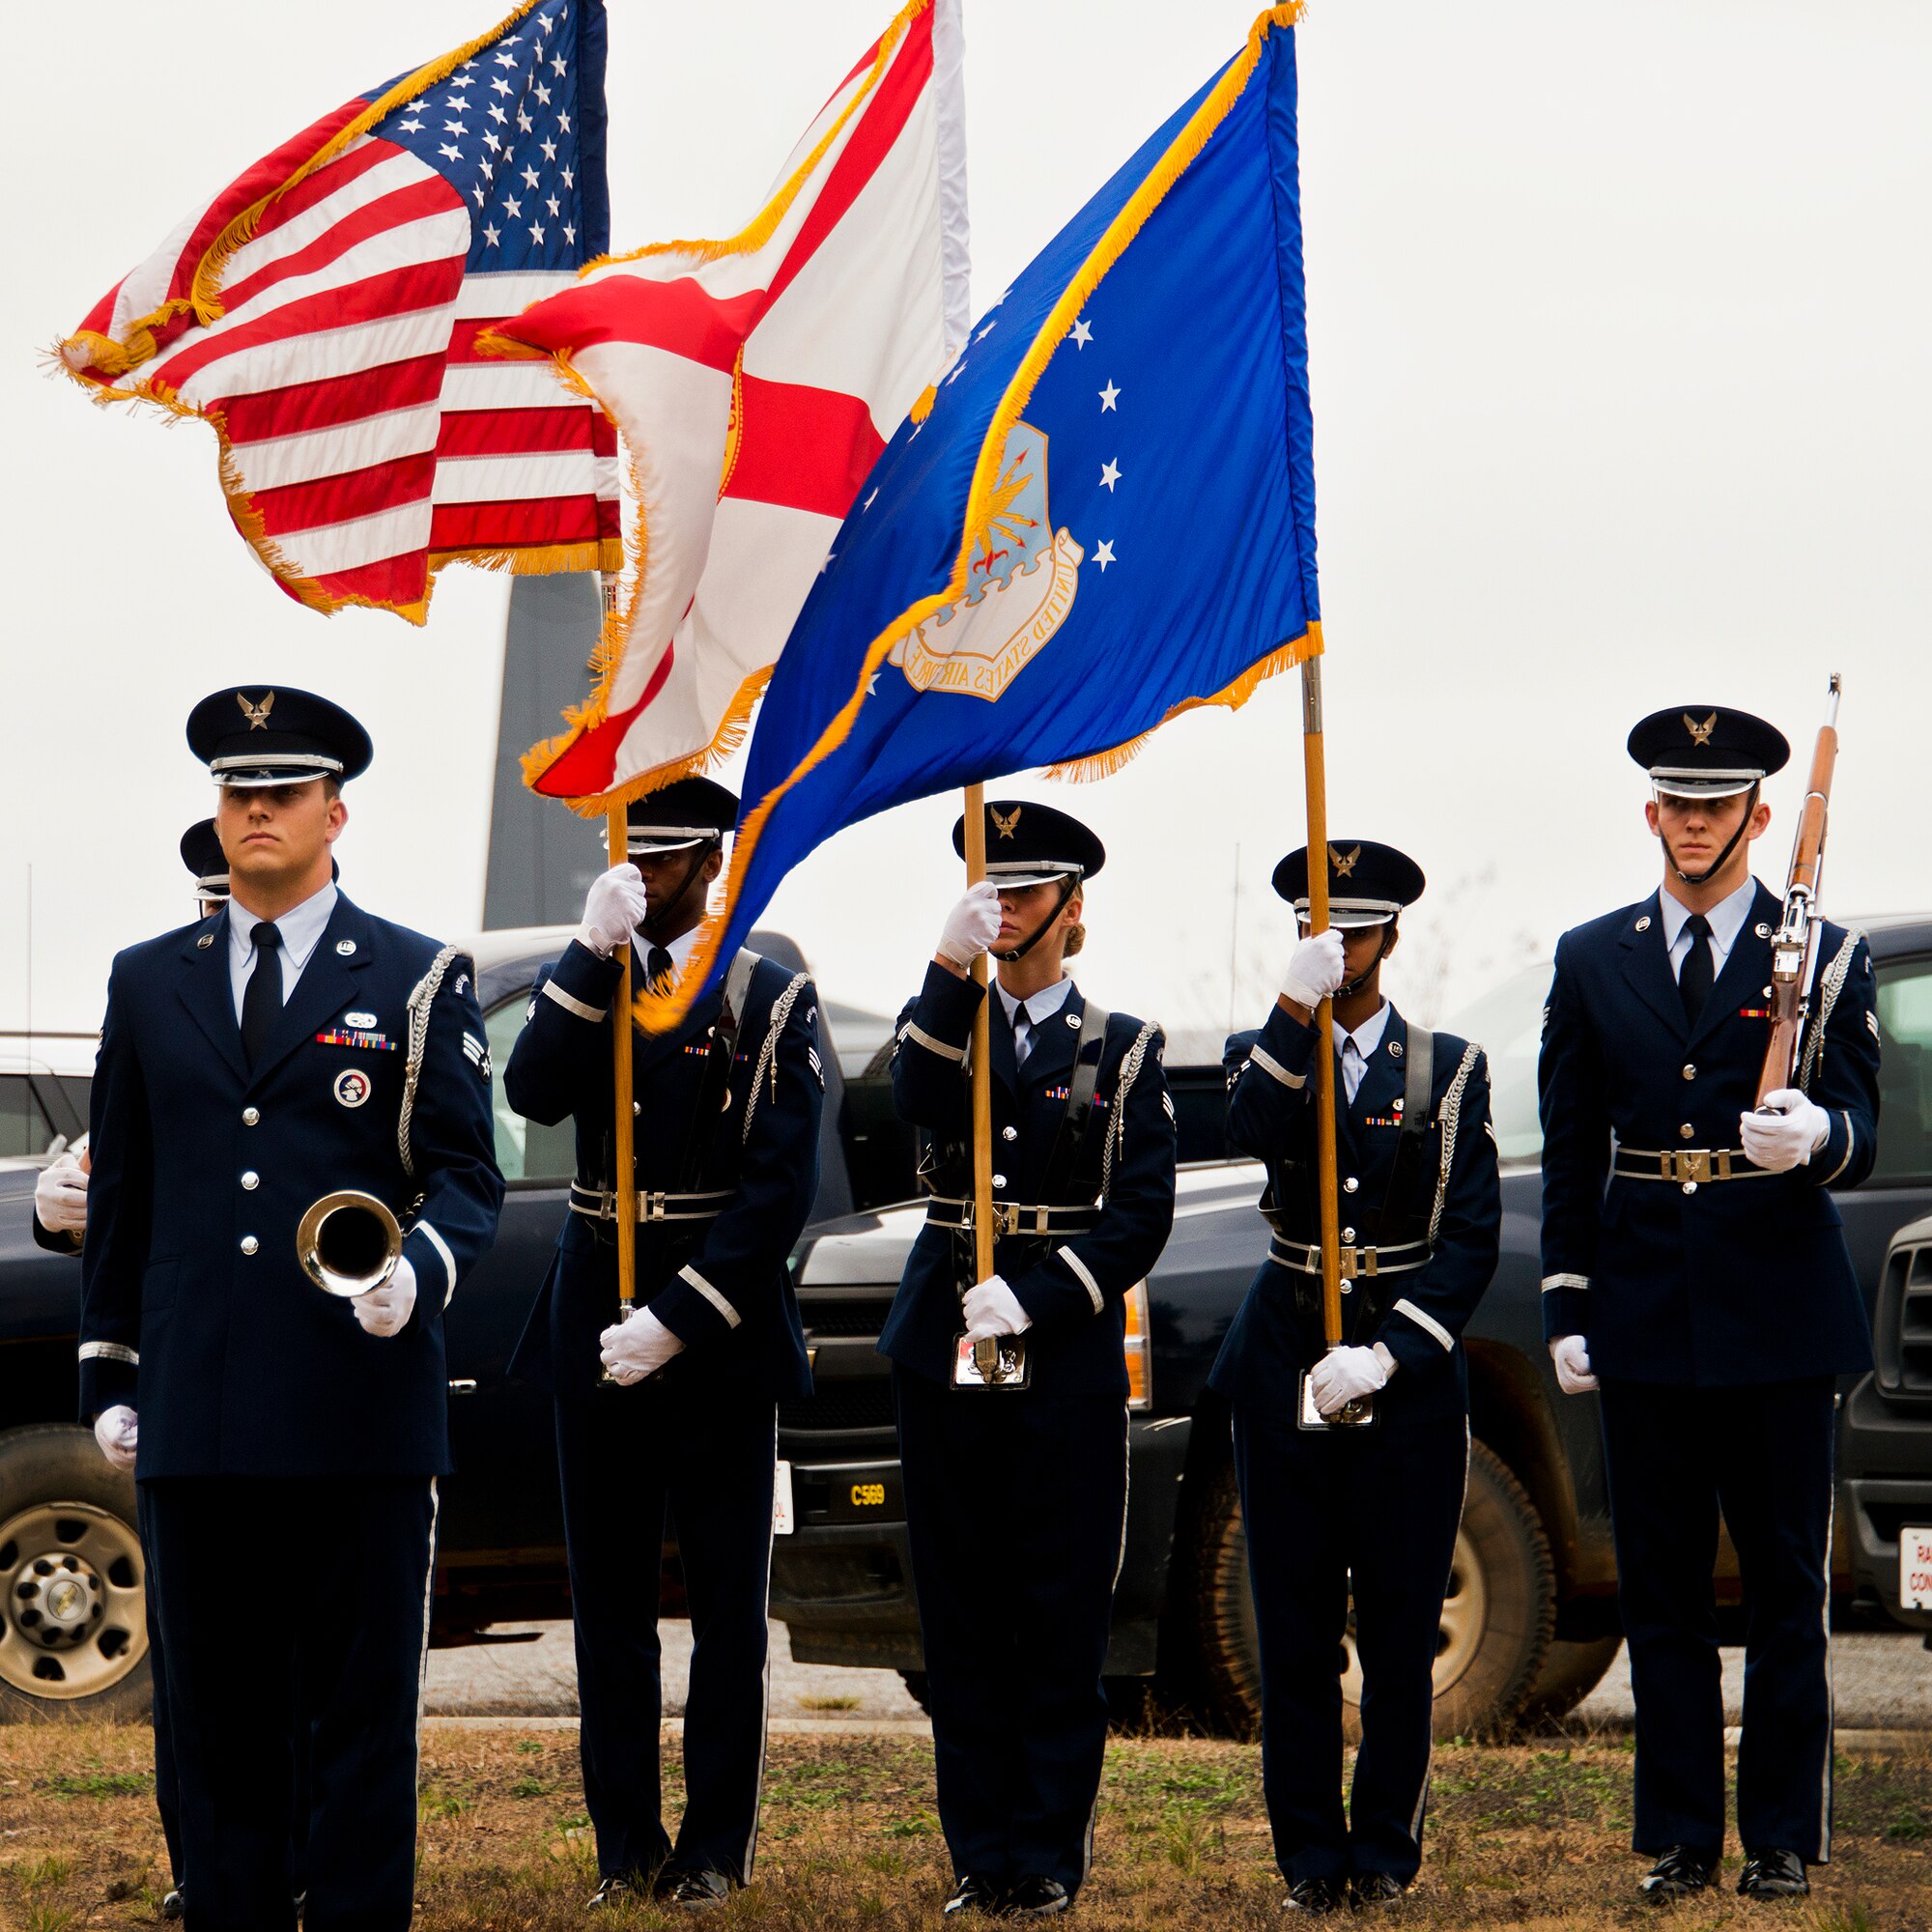 Senior Airman Anthony Holochwost and members of the Eglin Honor Guard wait to present the colors and play Taps at the Senior Airman Josh Santos memorial Jan. 13 at Duke Field.  Santos passed away Nov. 26 from colon cancer.  He was a radio operator with the 711th Special Operations Squadron.  During the memorial, it was announced the Duke Field gym would be renamed Santos Strength in his honor.  (U.S. Air Force photo/Tech. Sgt. Samuel King Jr.)